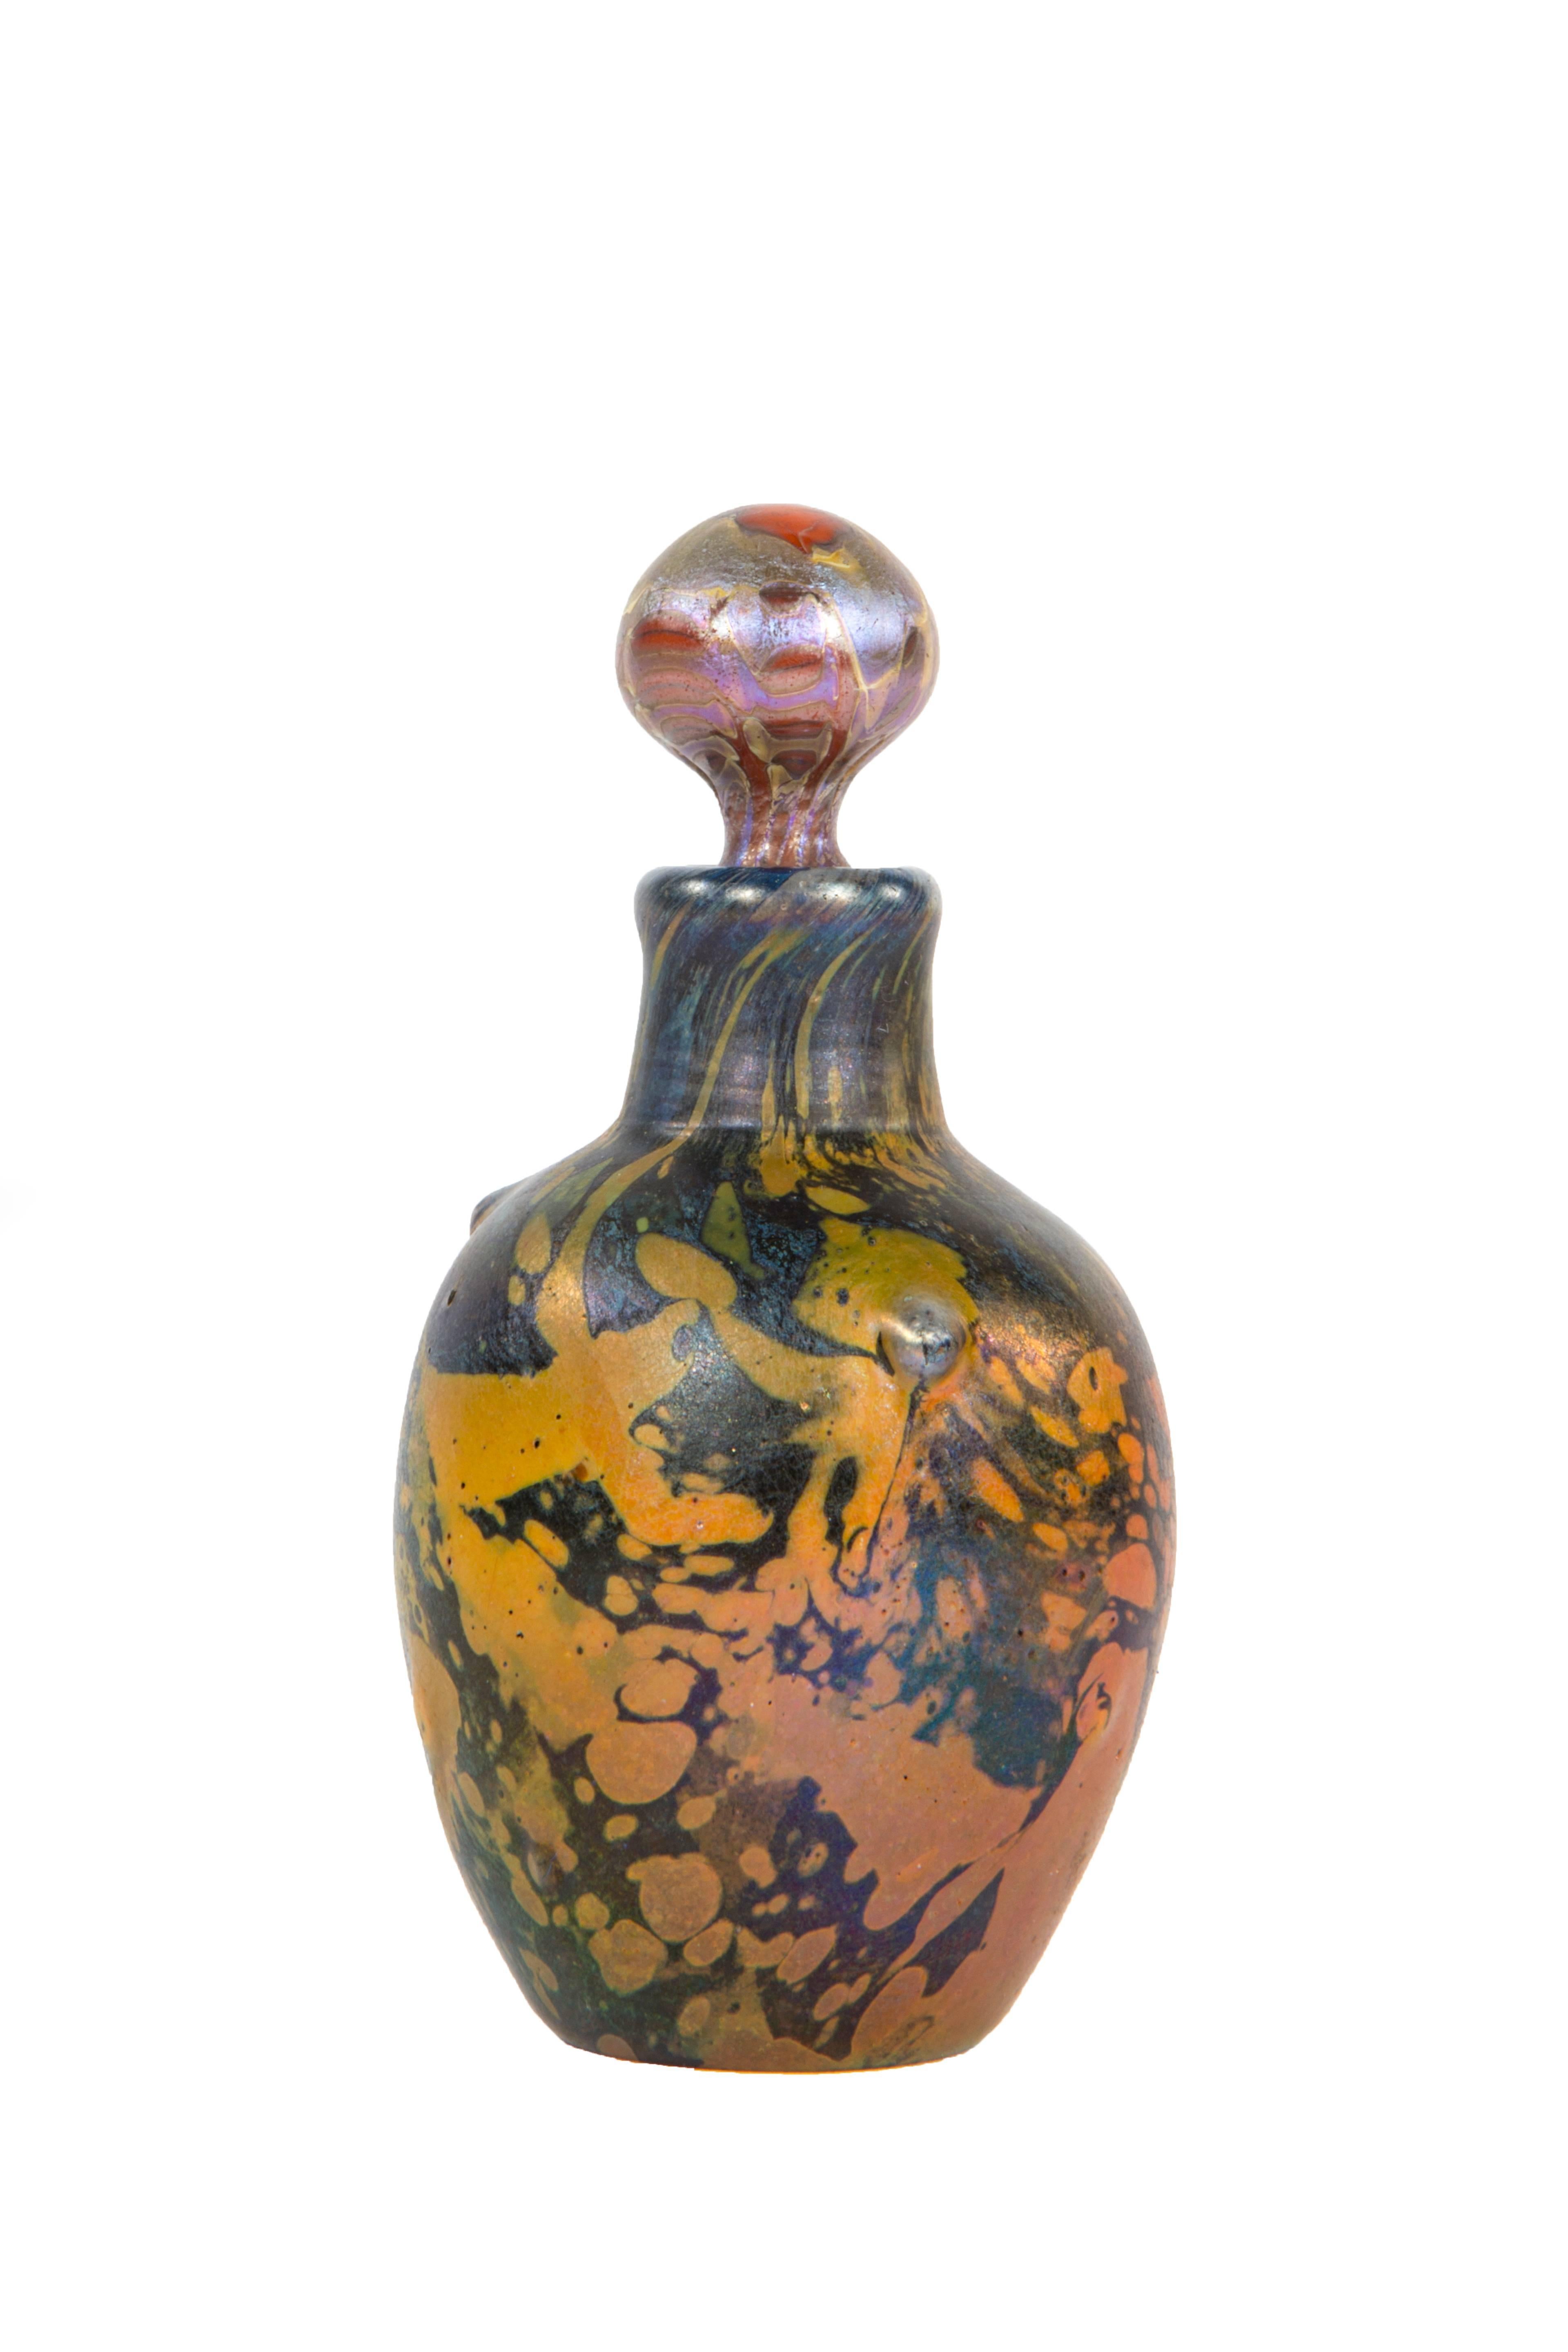 An extremely rare and stunning American Art Nouveau blown glass 